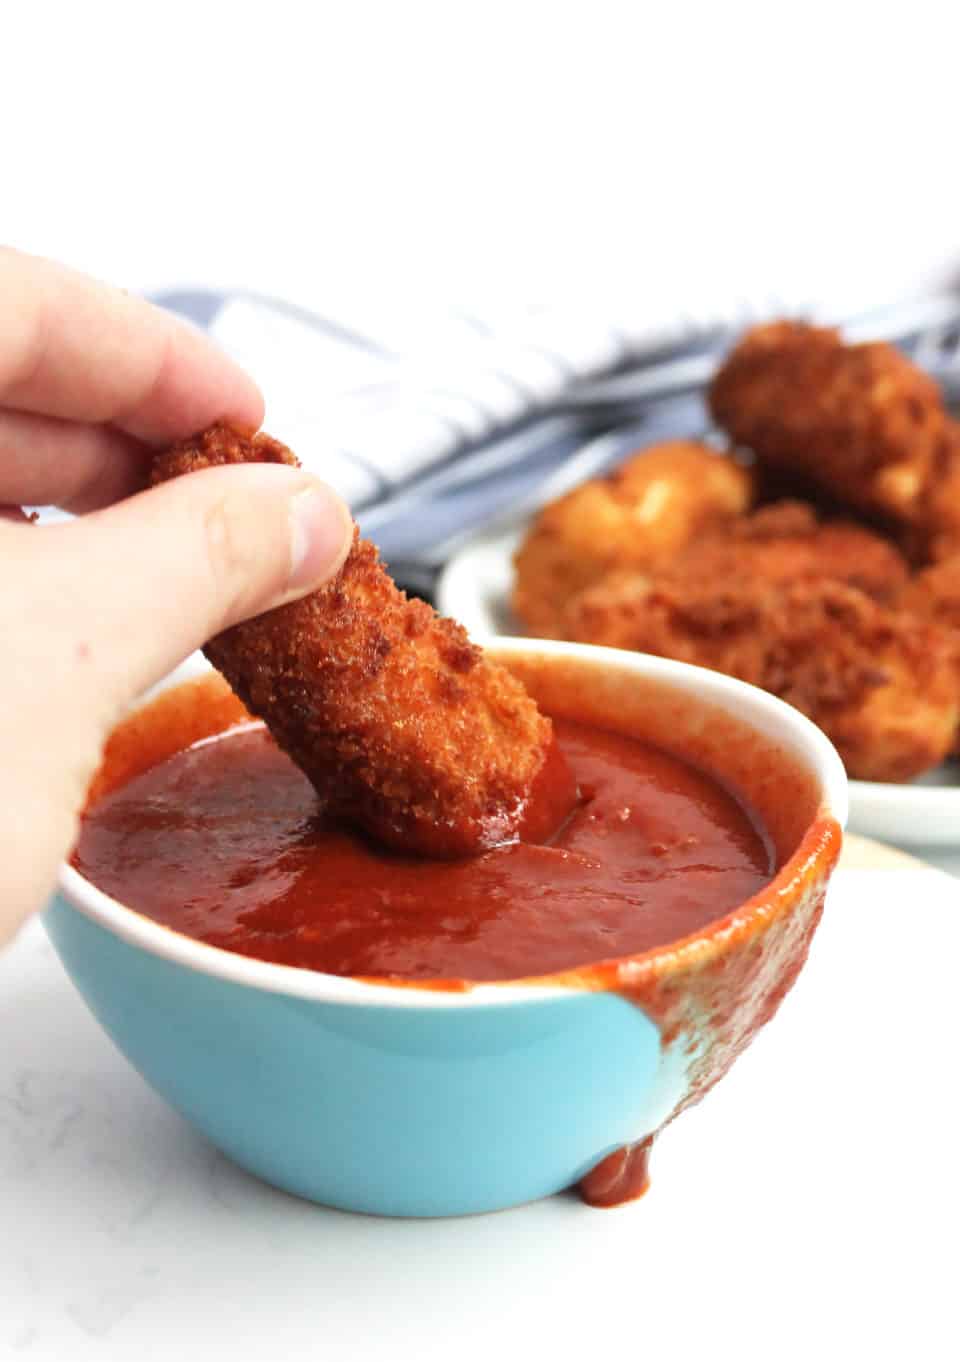 A breaded tofu stick being dipped in a red sauce